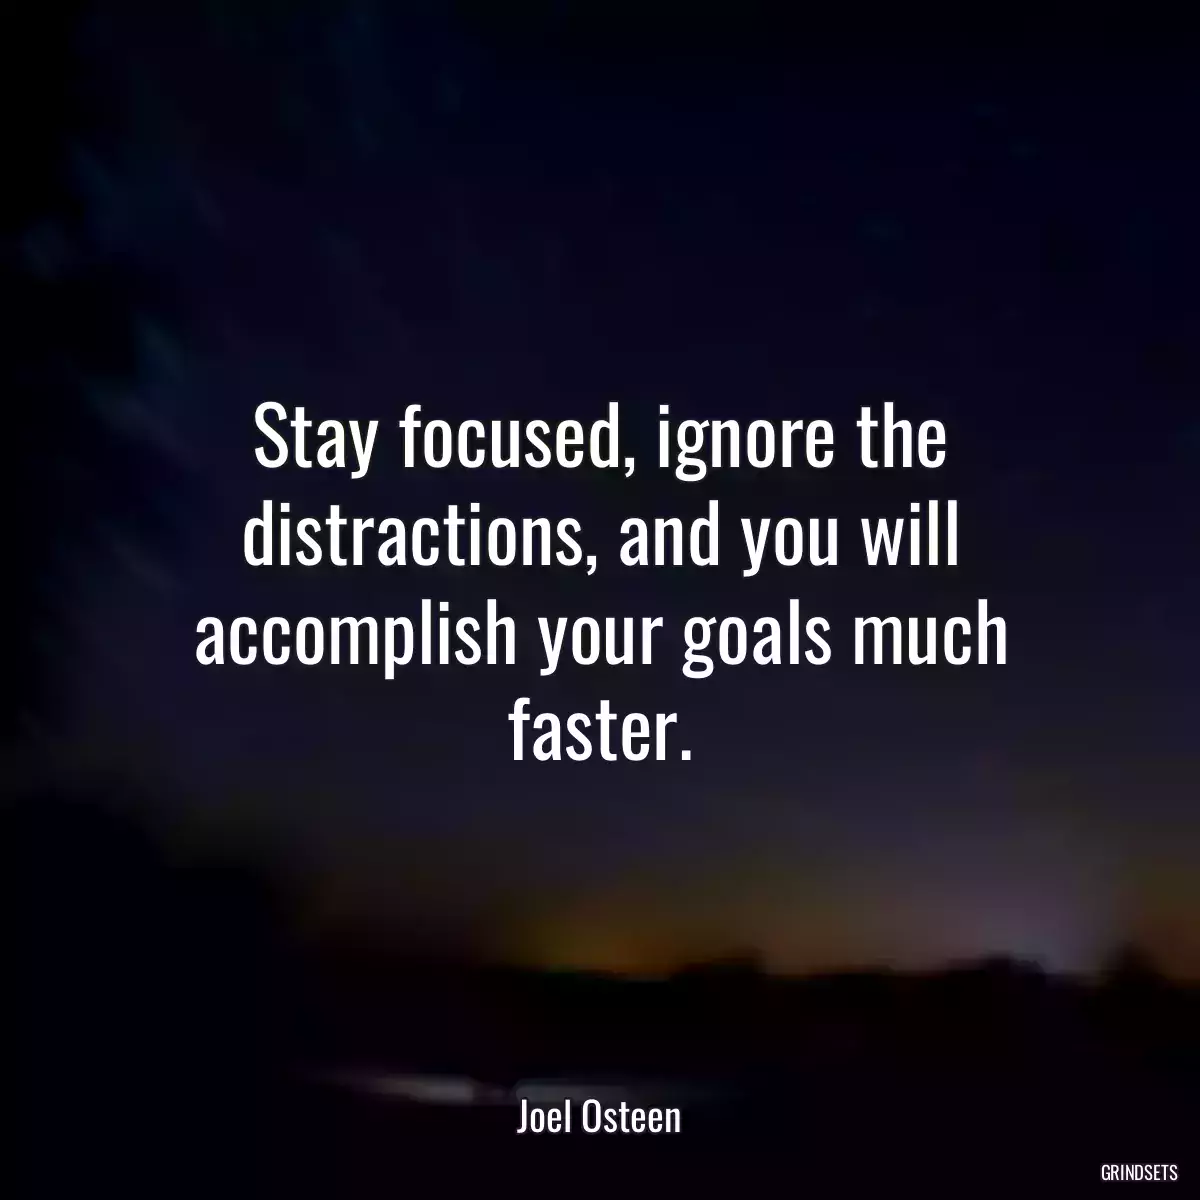 Stay focused, ignore the distractions, and you will accomplish your goals much faster.